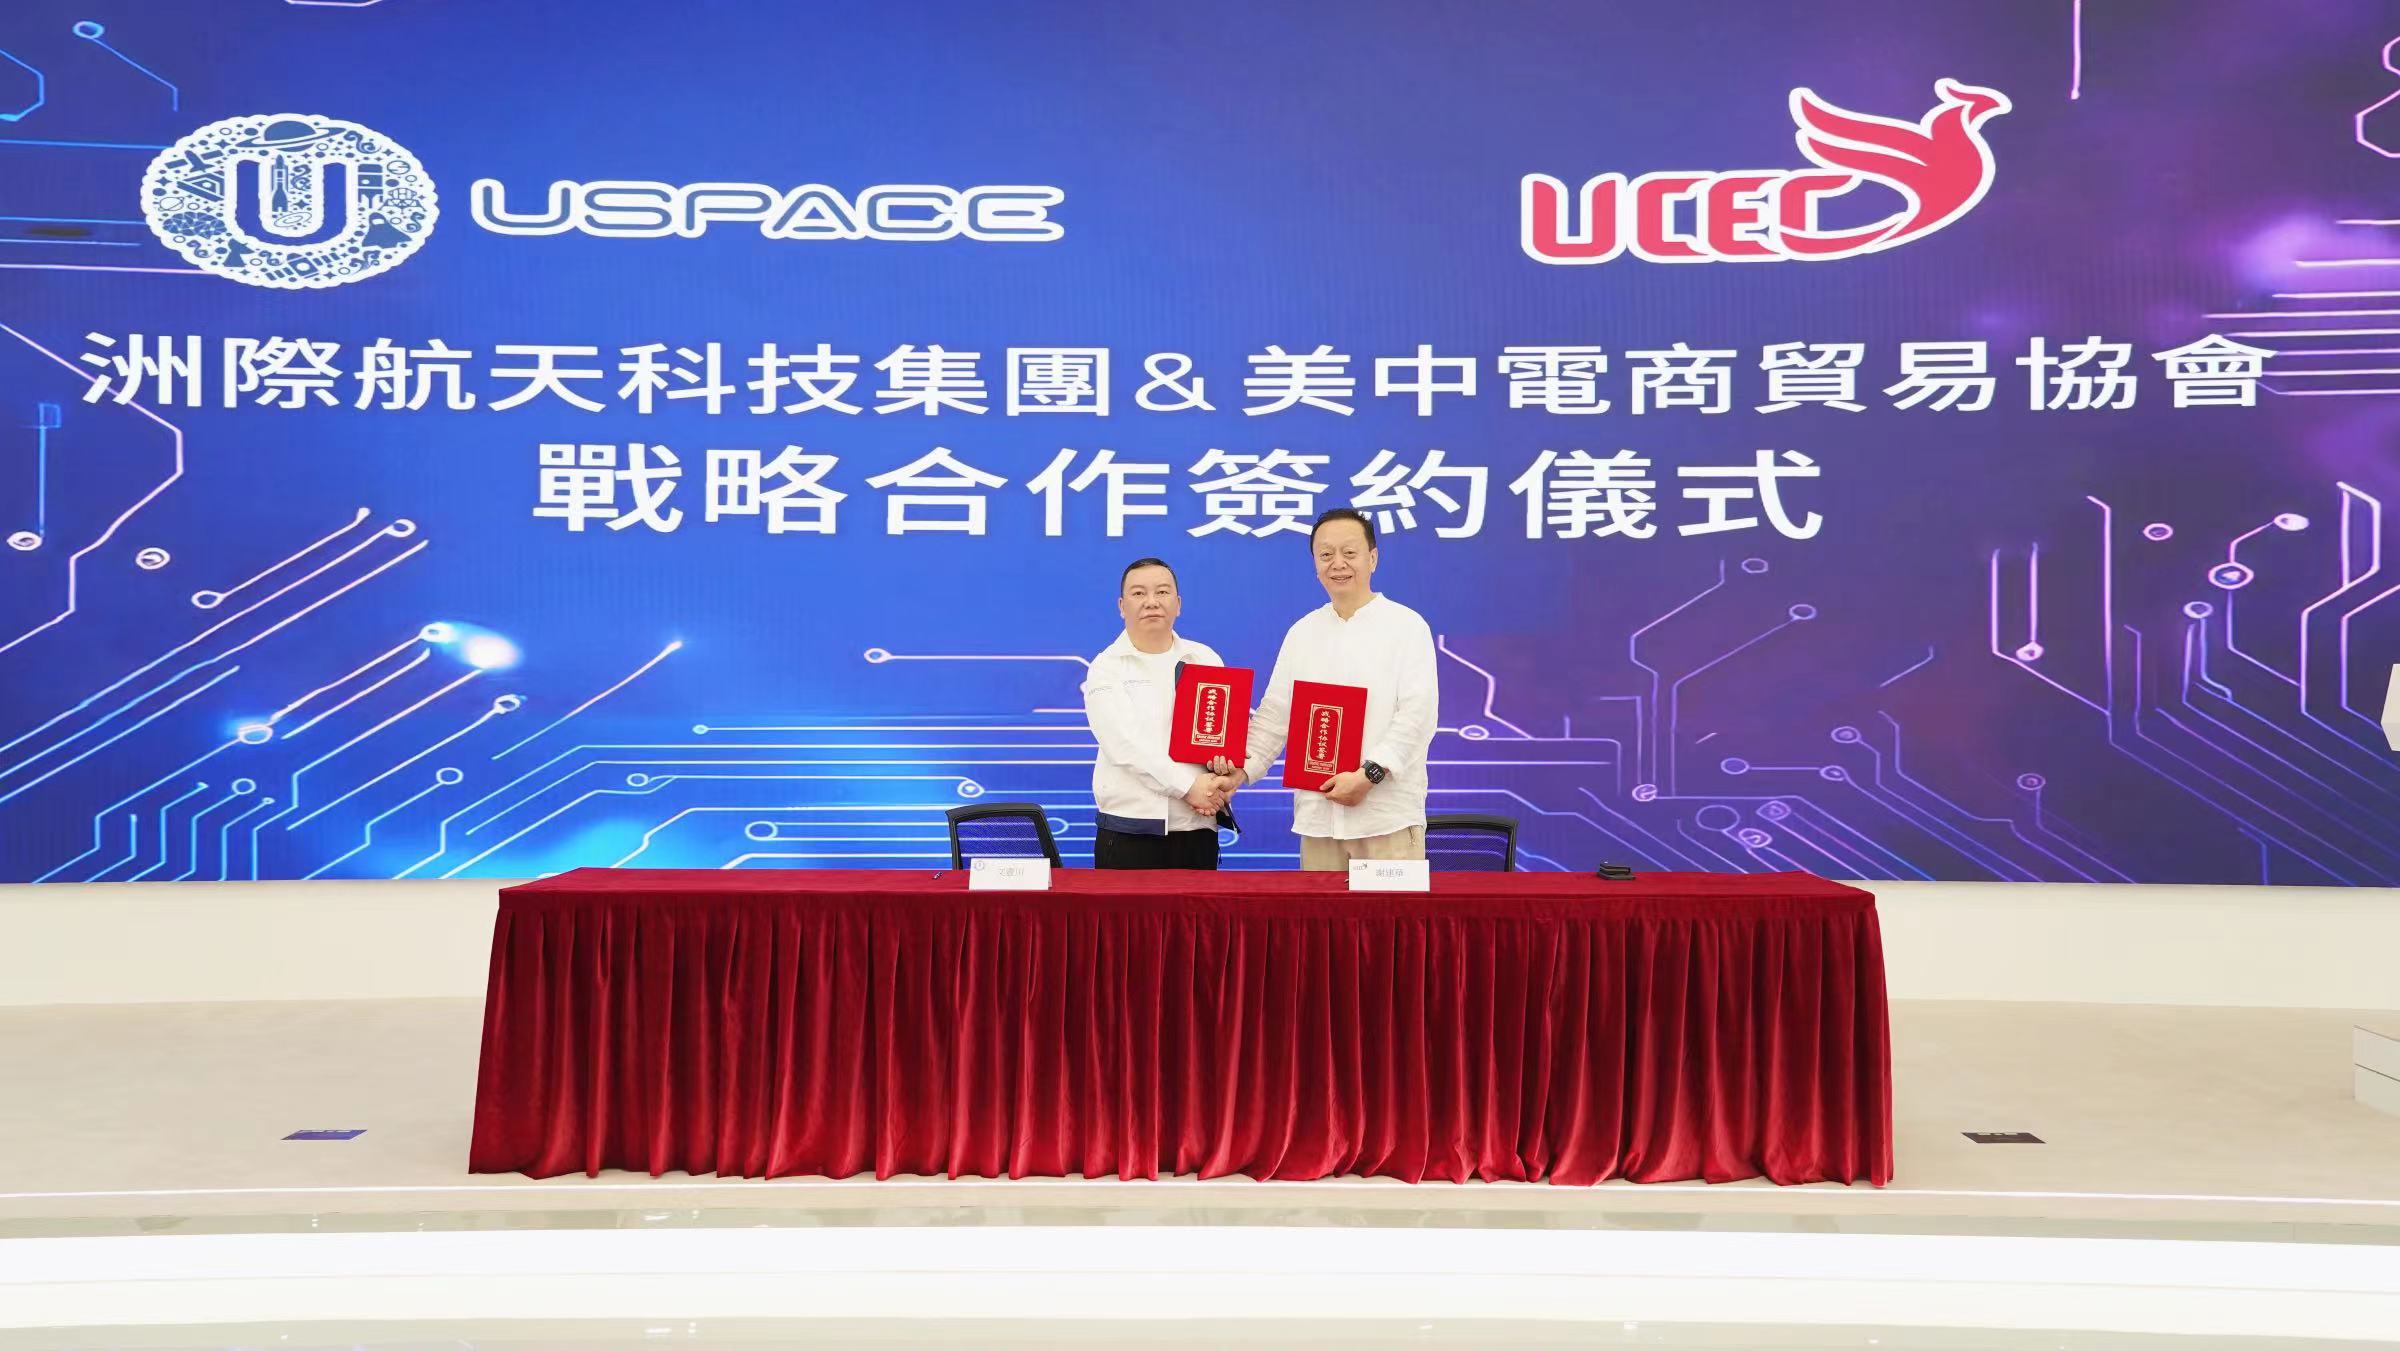 USPACE Signs Strategic Cooperation Agreement UCETC, and Thunder International Group INC